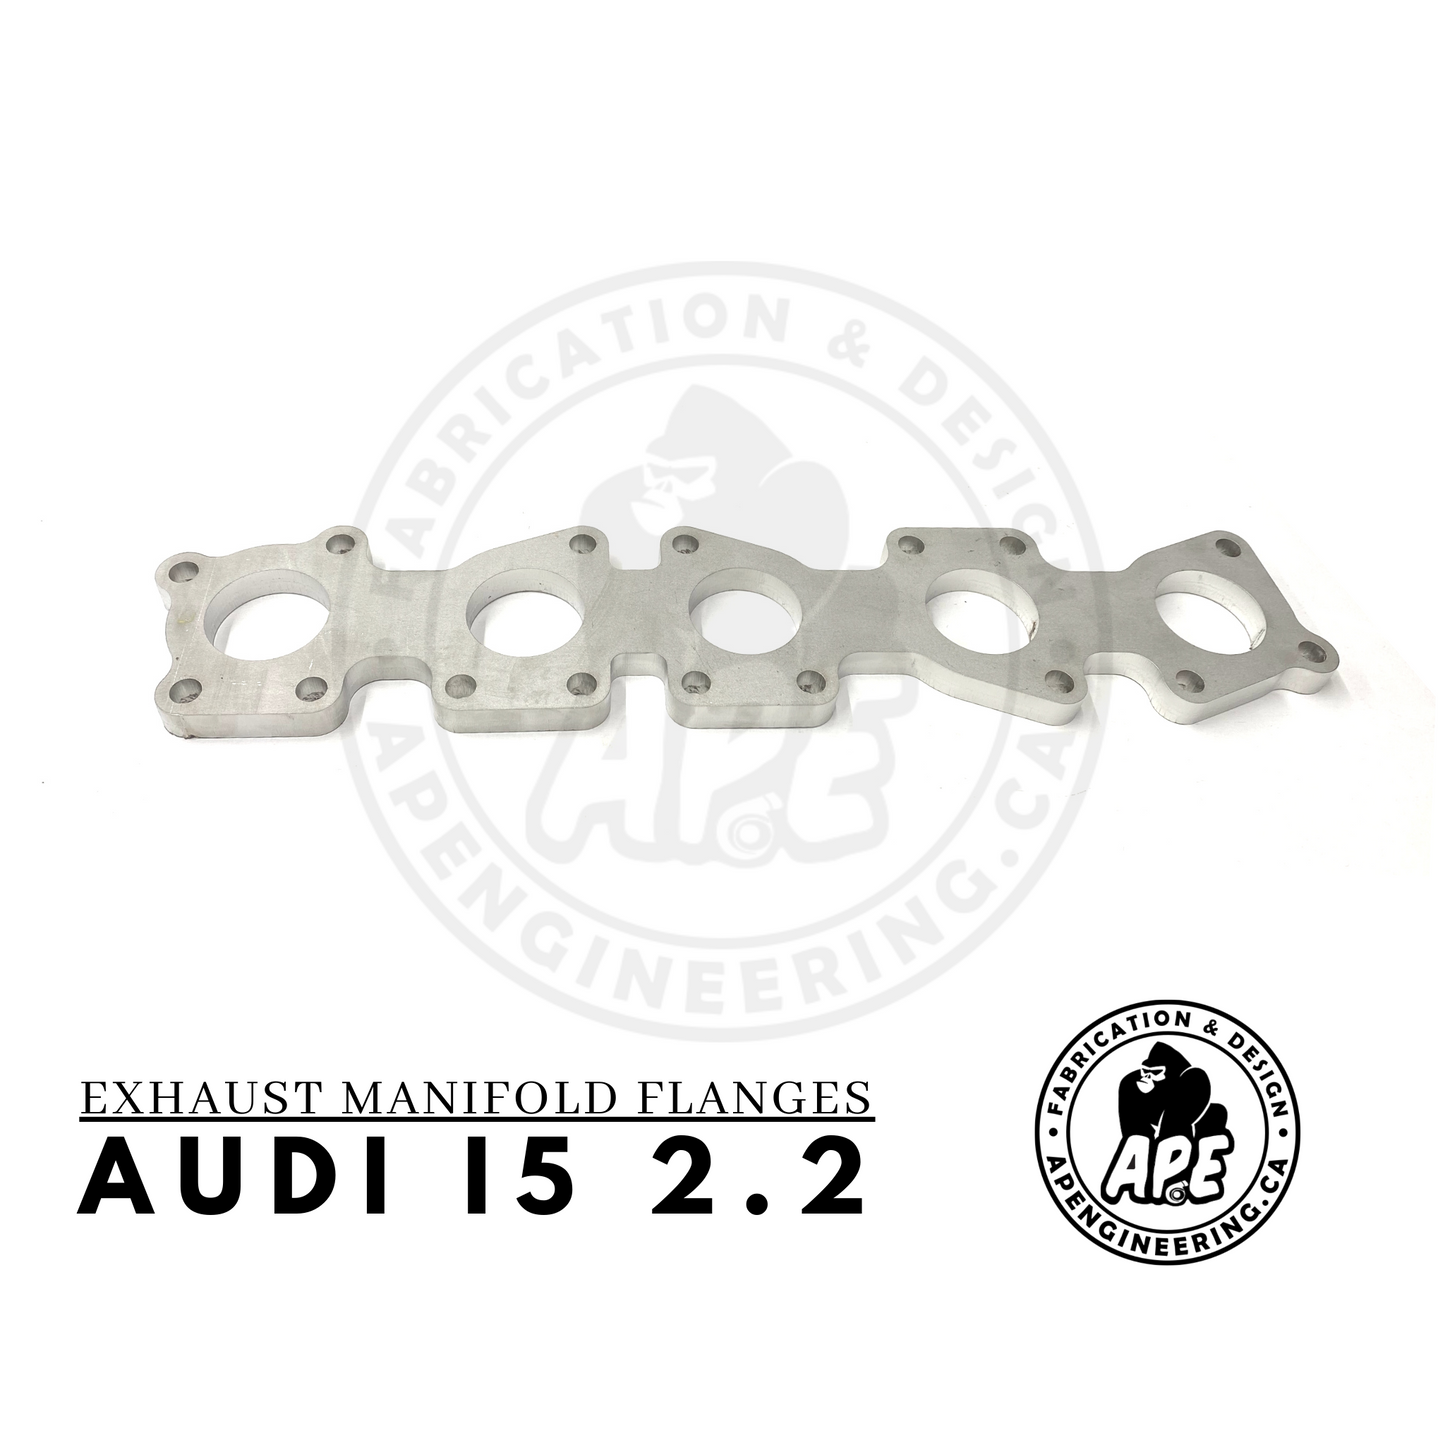 AUDI 2.2 I5 AAN EXHAUST MANIFOLD FLANGE - 1/2 STAINLESS STEEL